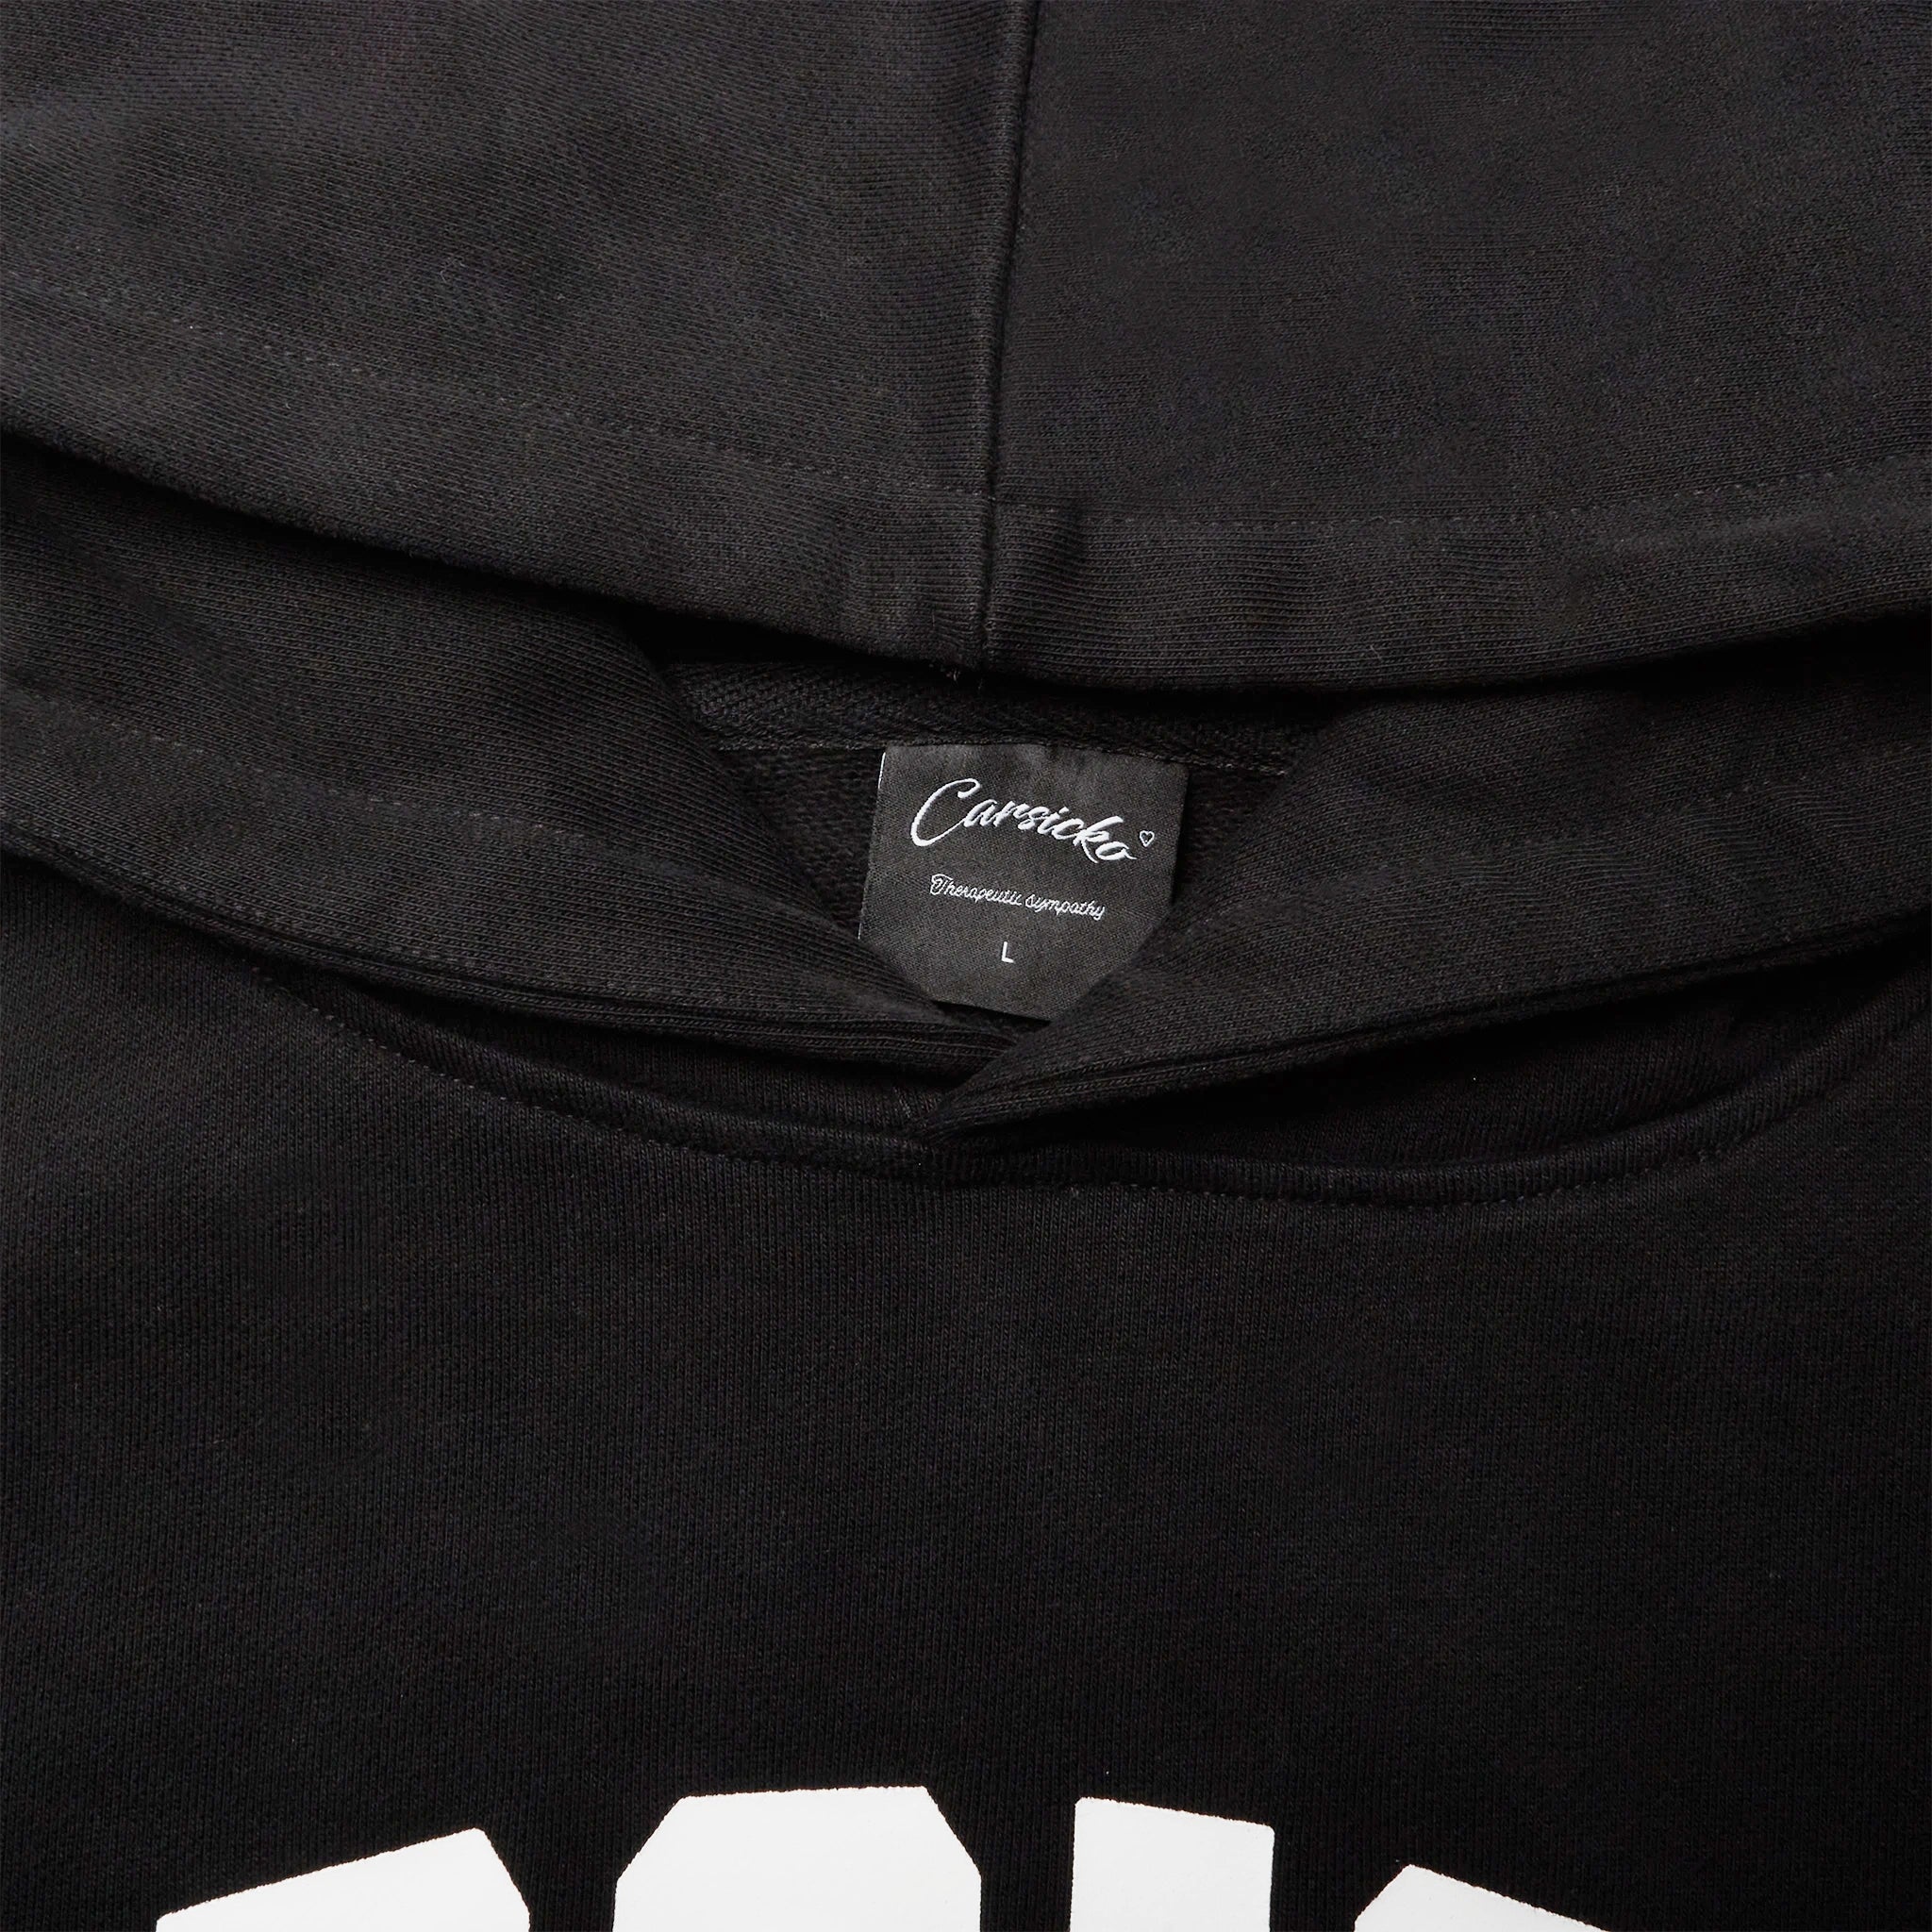 Neck view of Carsicko London Black Hoodie